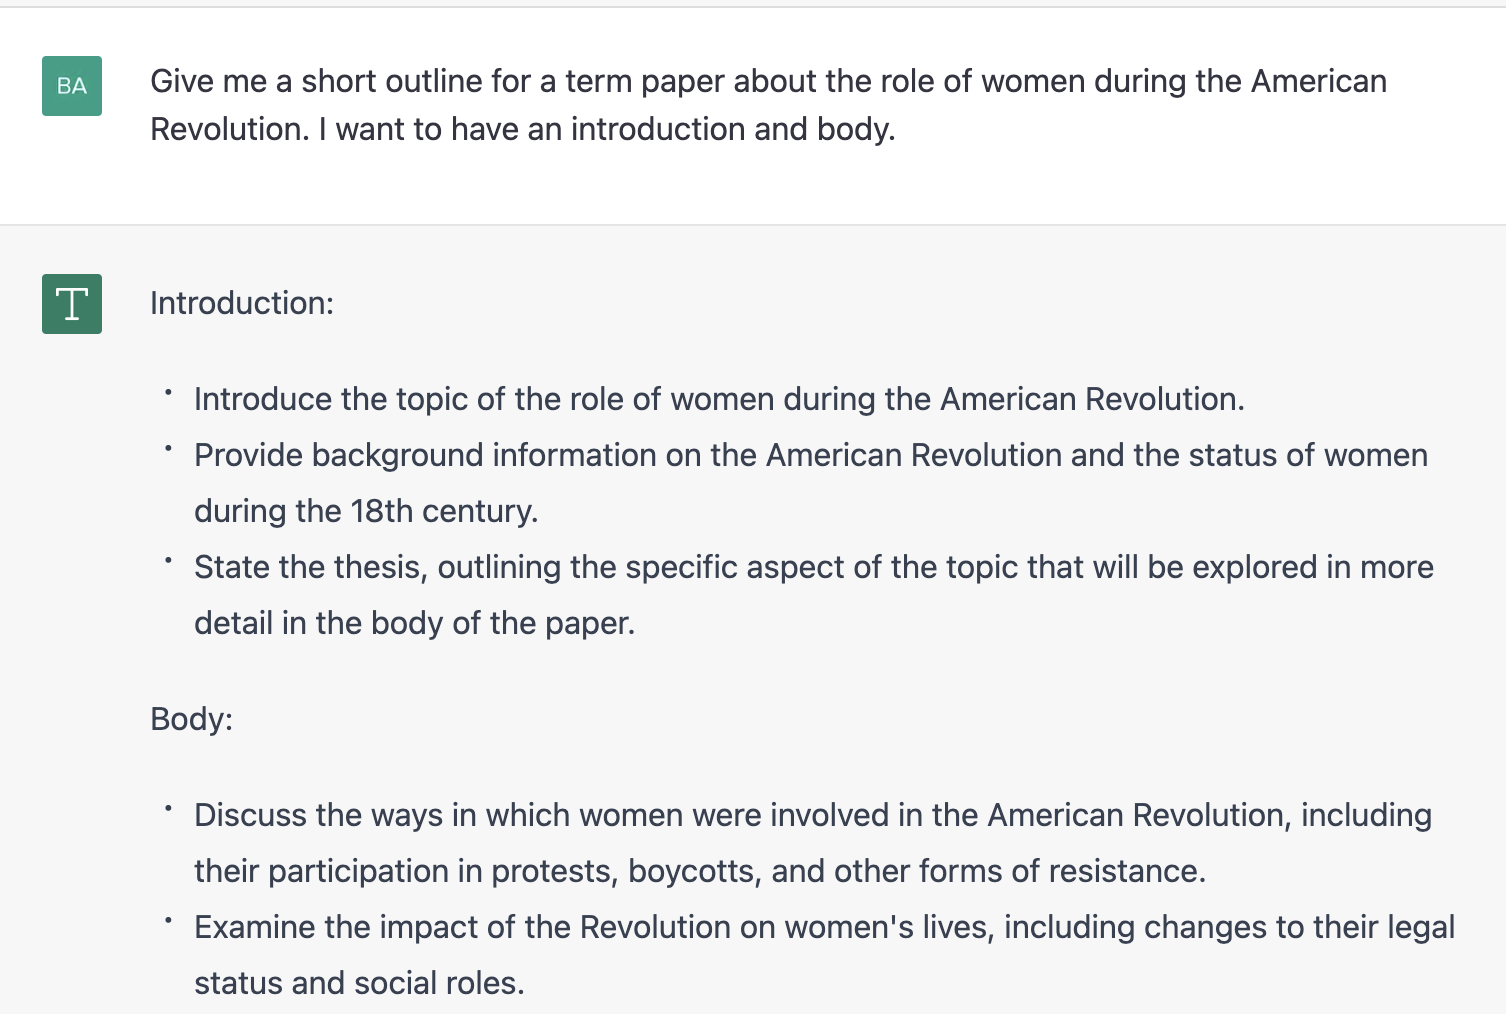 ChatGPT prompt about giving a short outline for a term paper about the role of women during the American Revolution